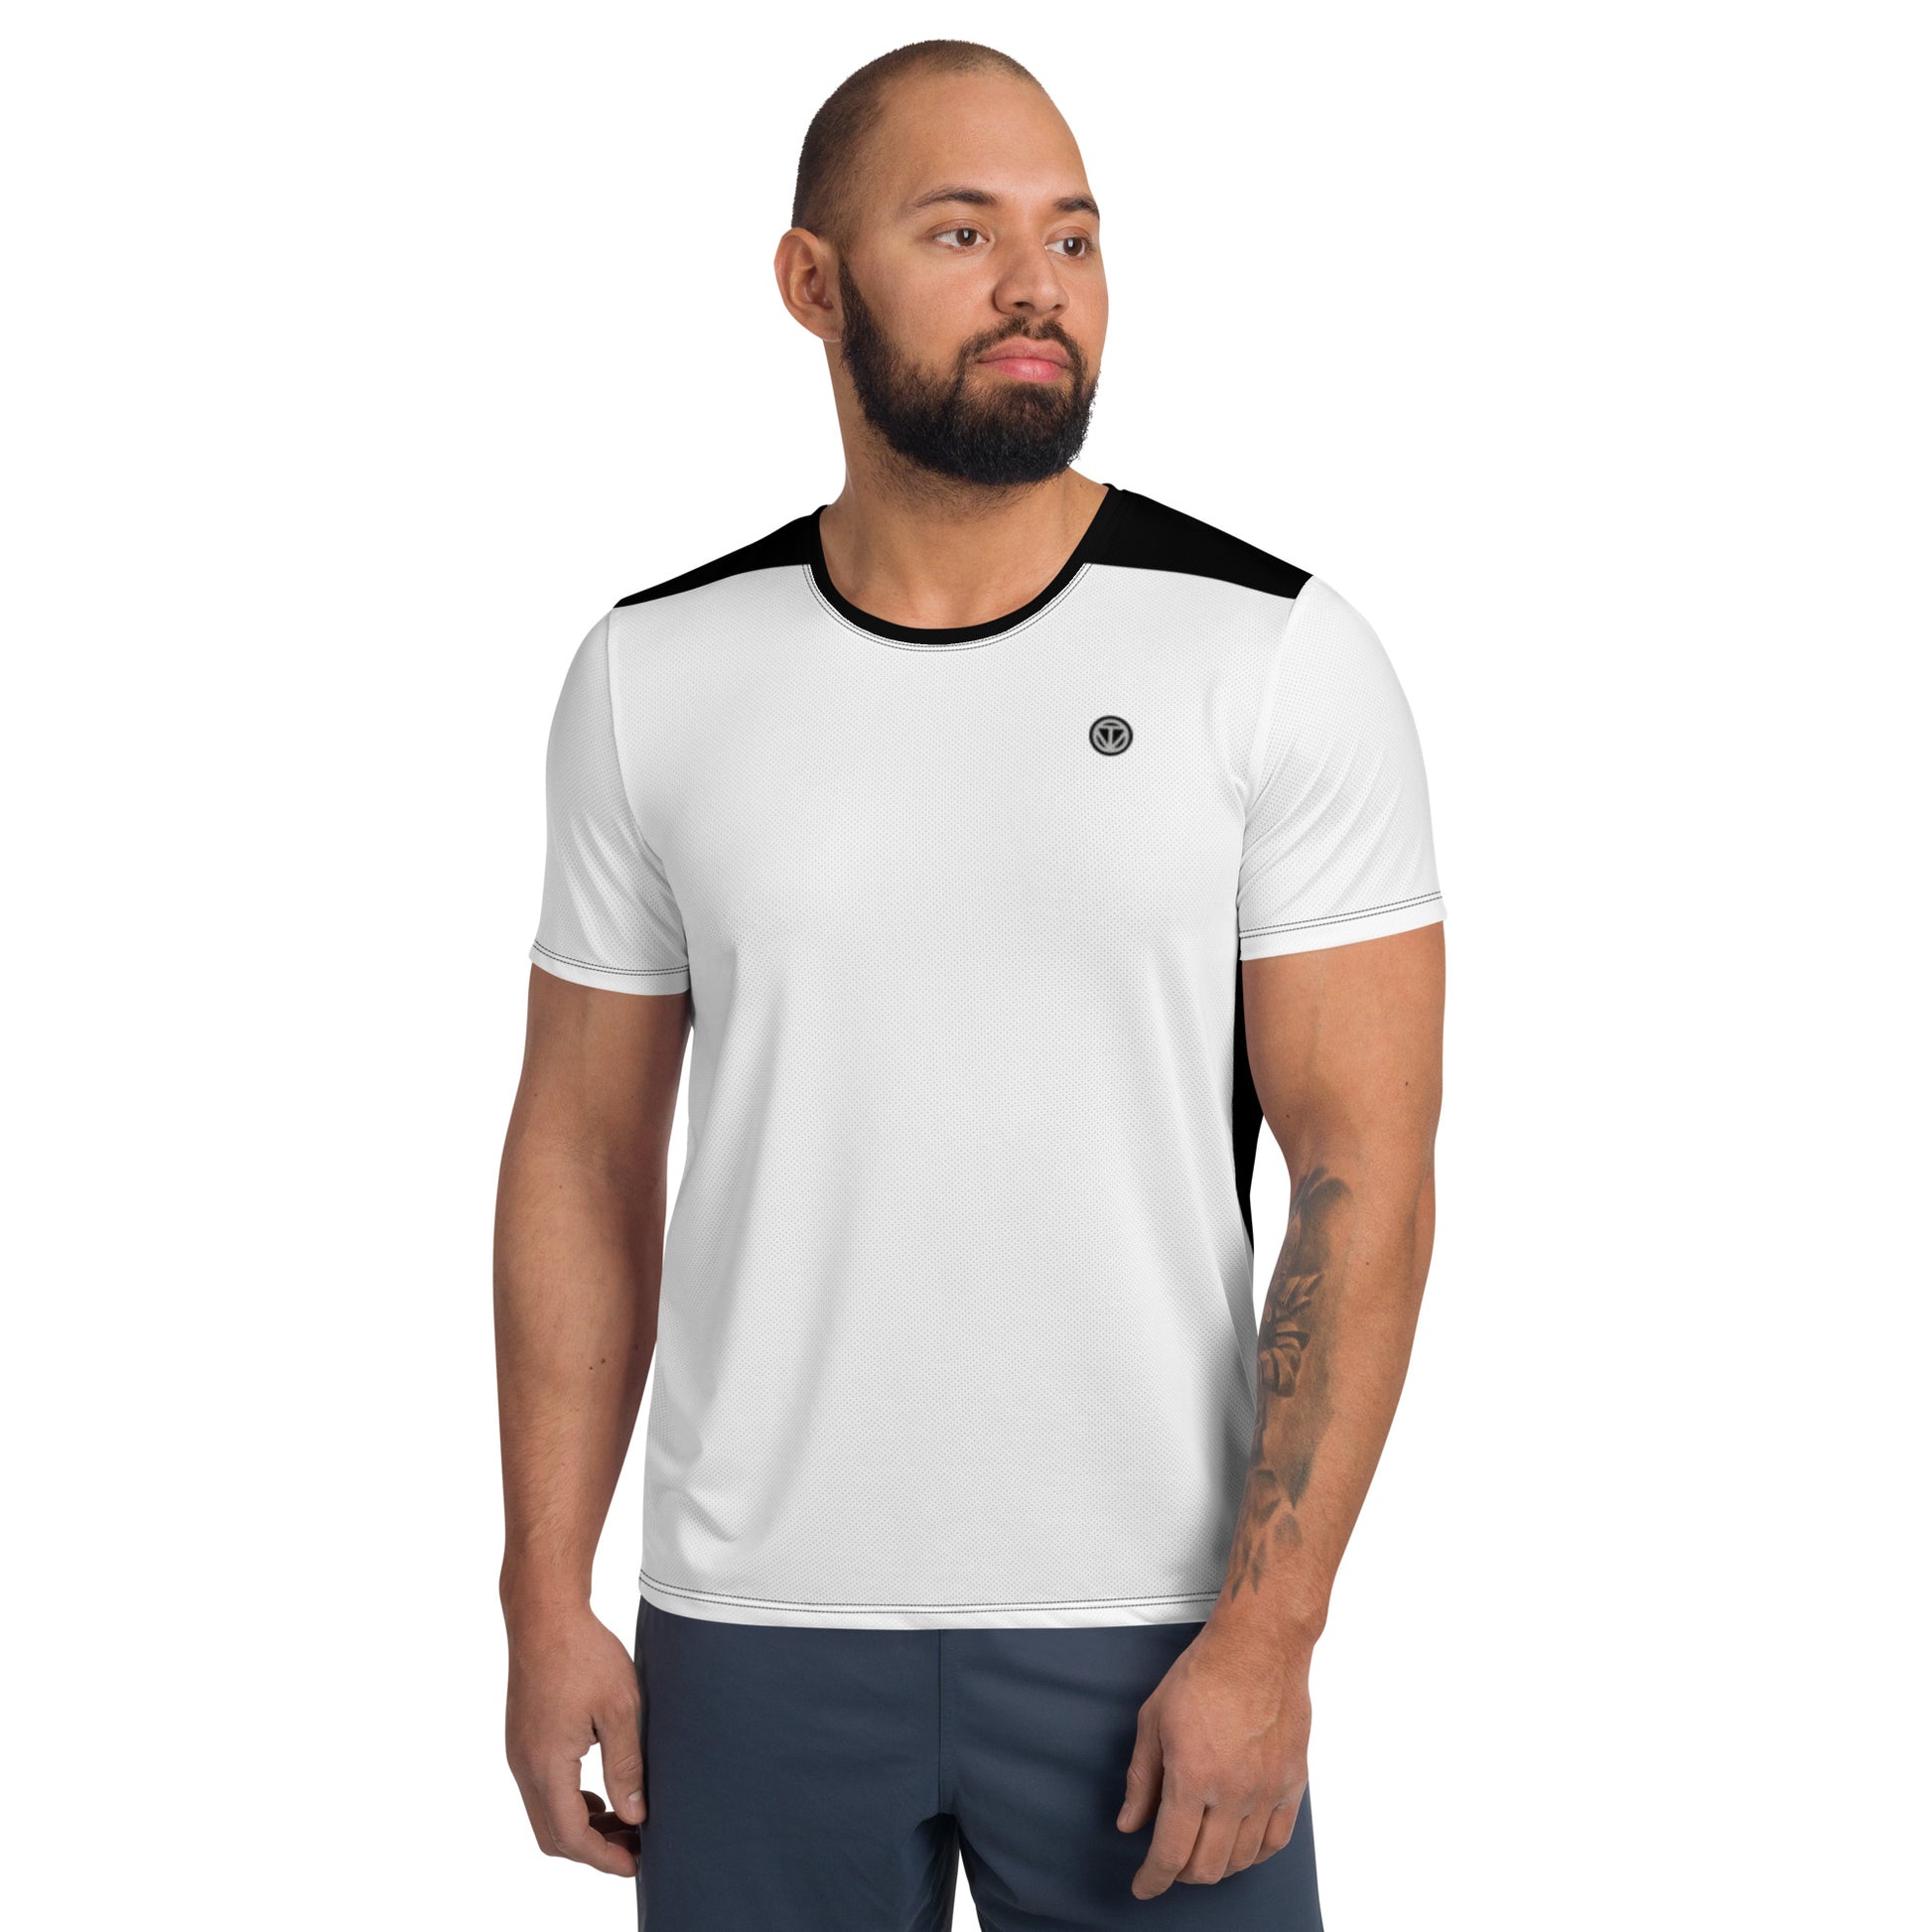 TIME OF VIBES - Men's Athletic T-shirt FIRST (White/black) - €45.00